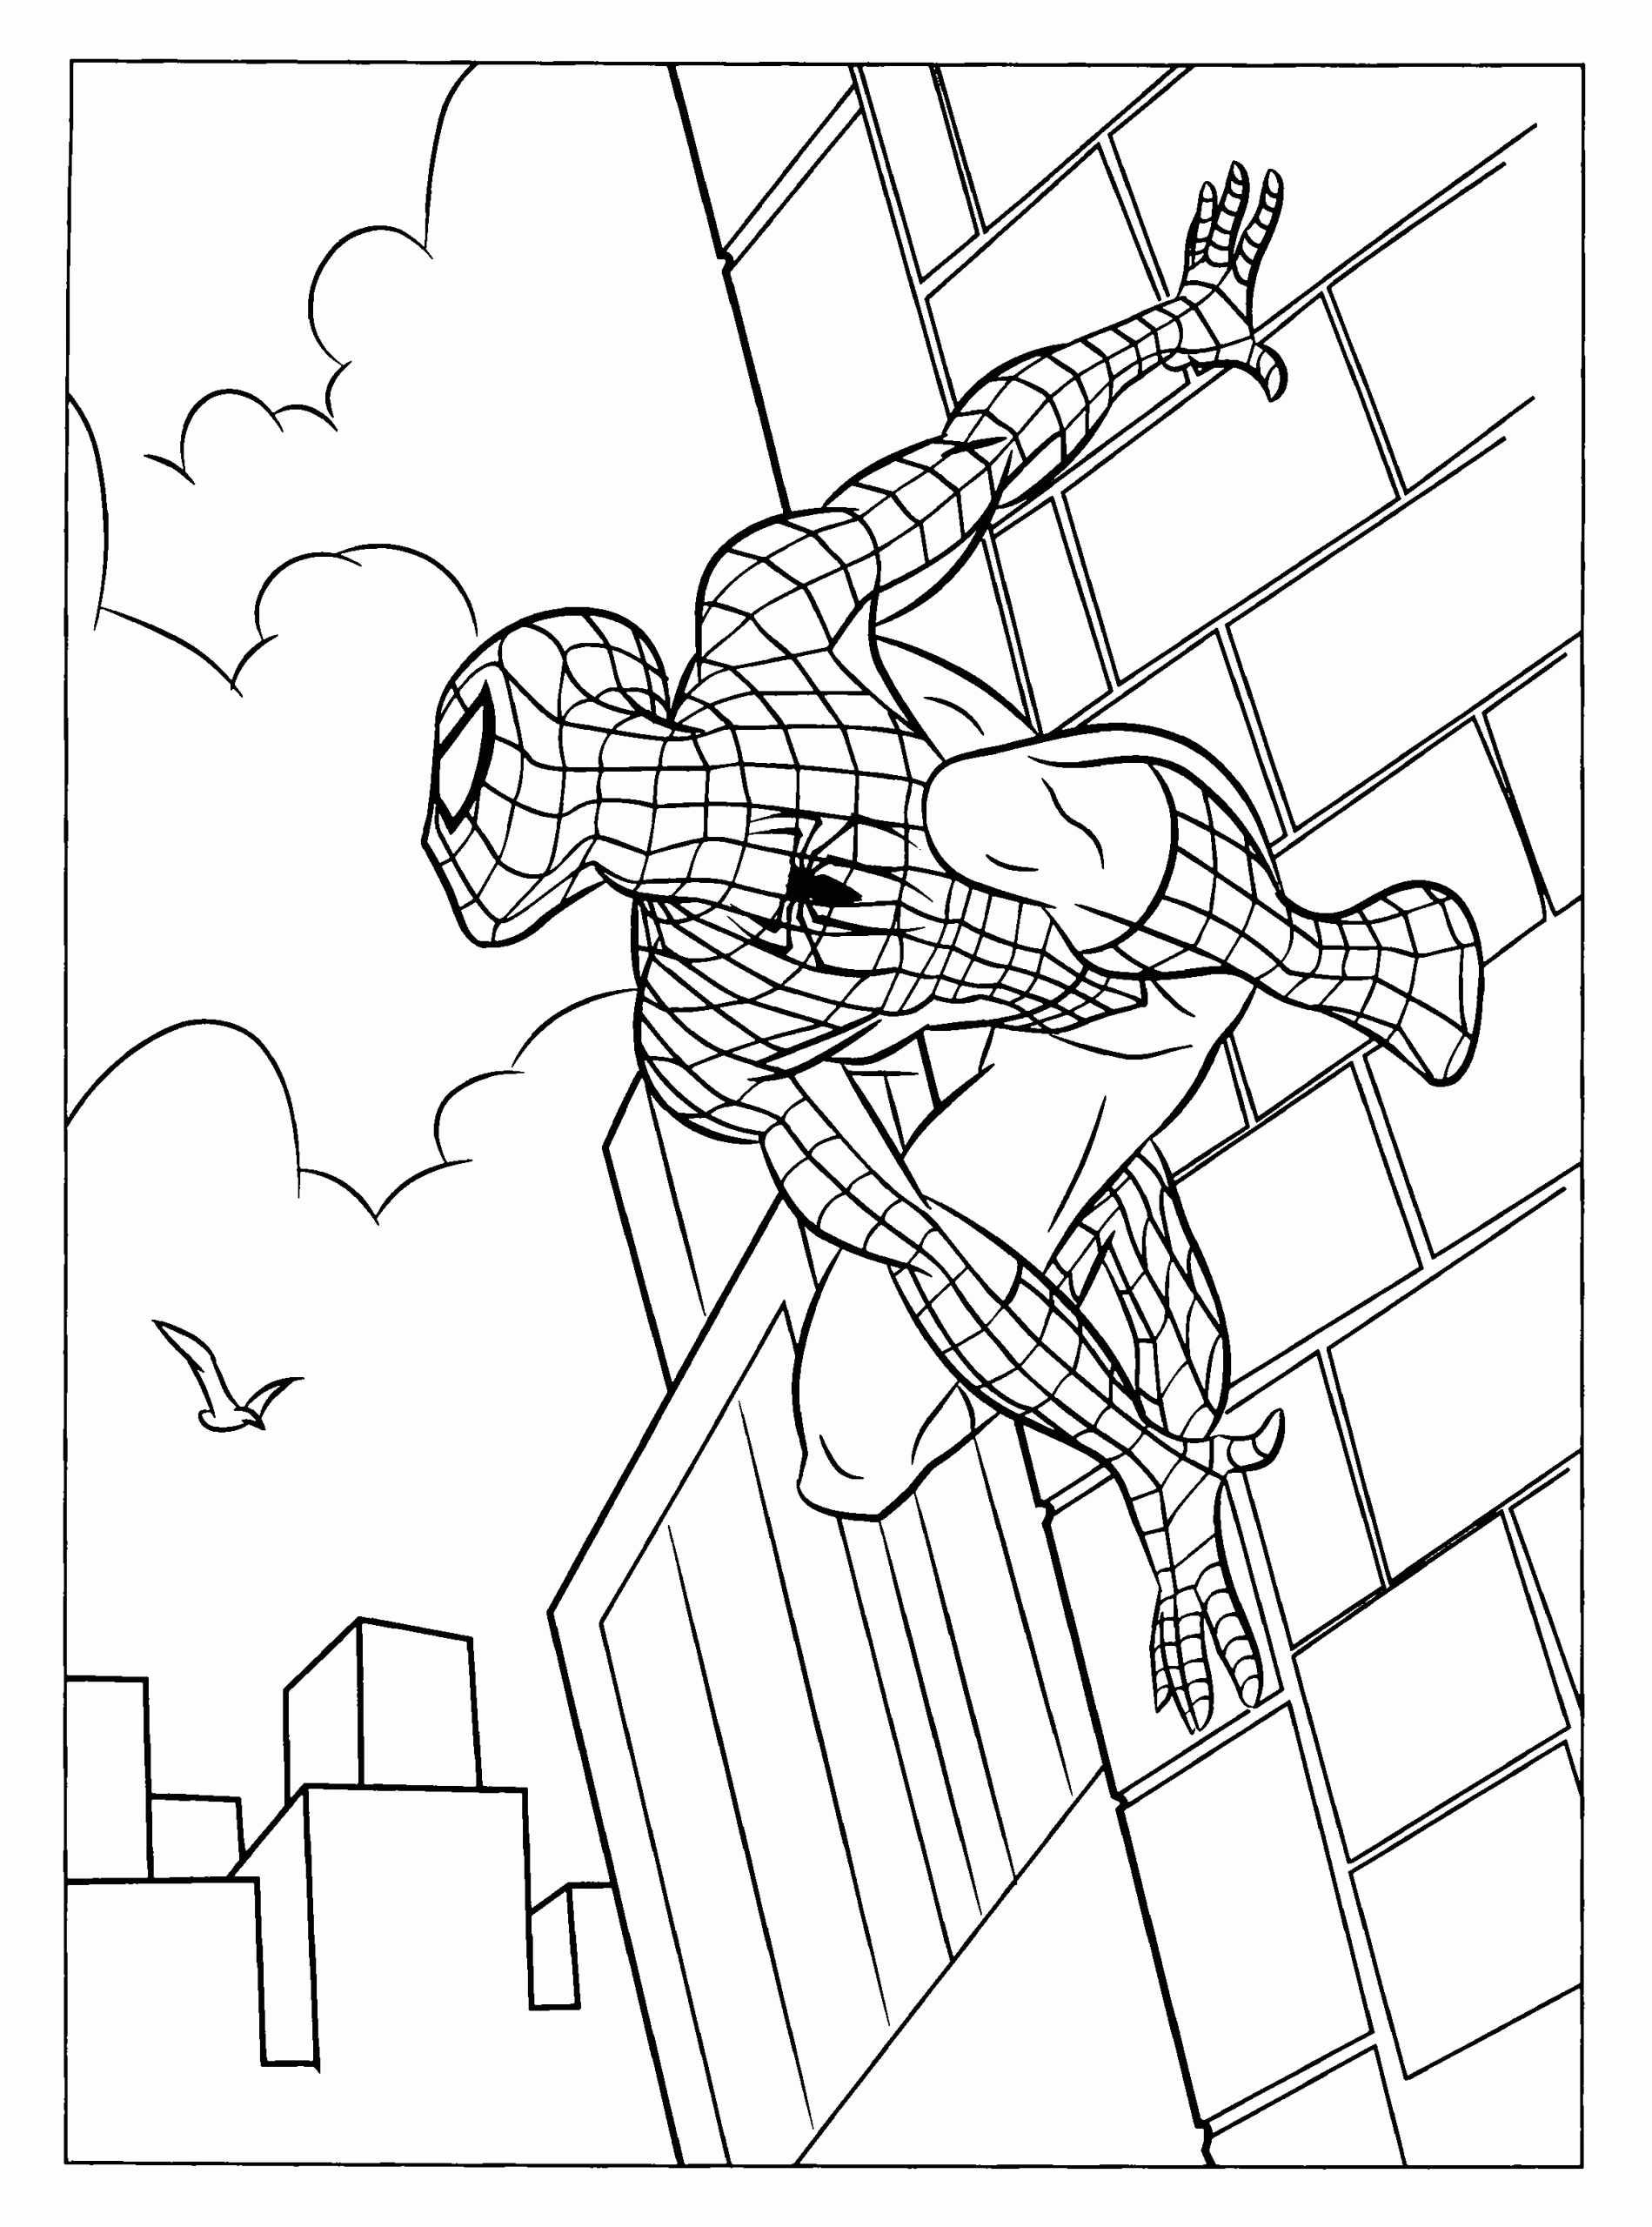 Spiderman Coloring Pages For Kids
 Spiderman coloring page for free print